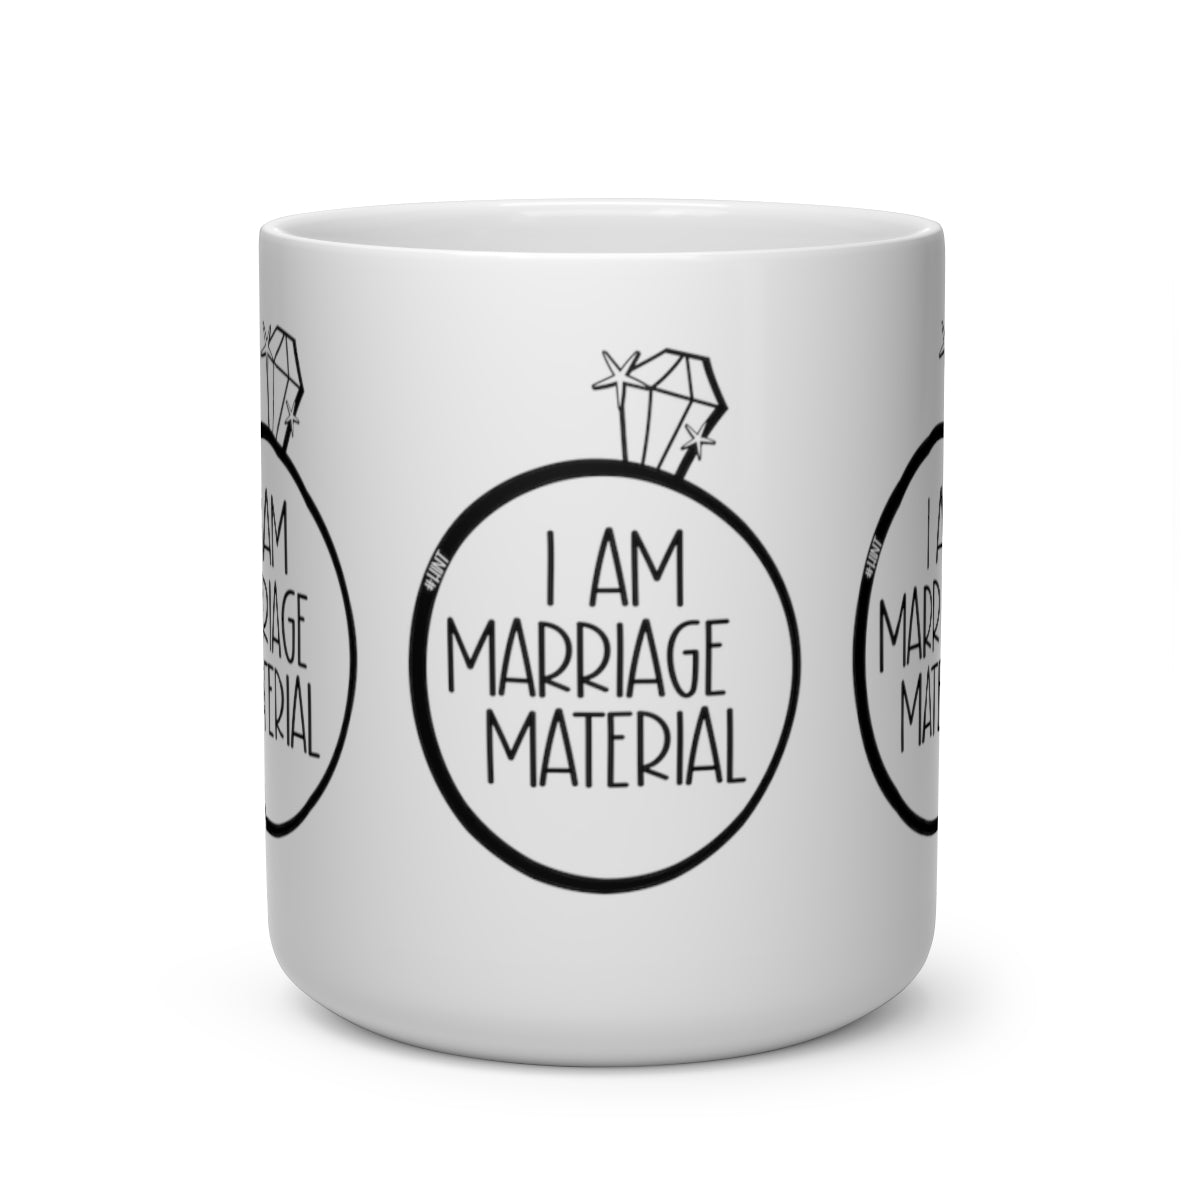 #WEIRDO | That awkward moment when you give your partner a hint that you want them to marry you! This white mug with heart shaped handle says: I AM MARRIAGE MATERIAL!